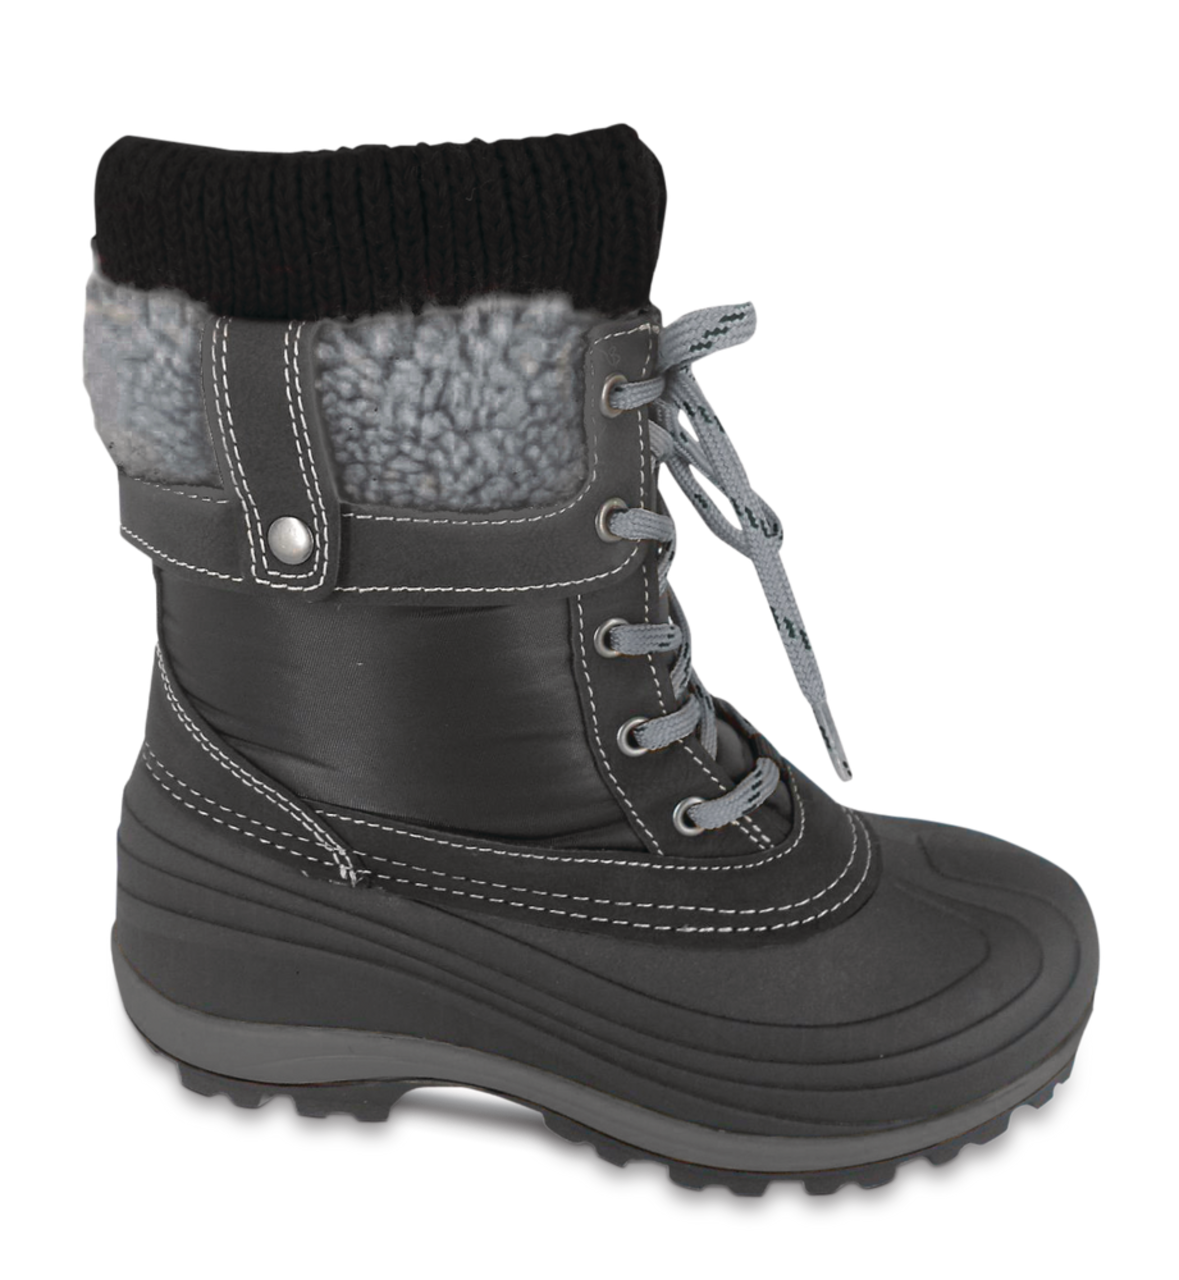 Outbound Women's Muskoka Insulated Water-Resistant Winter Snow